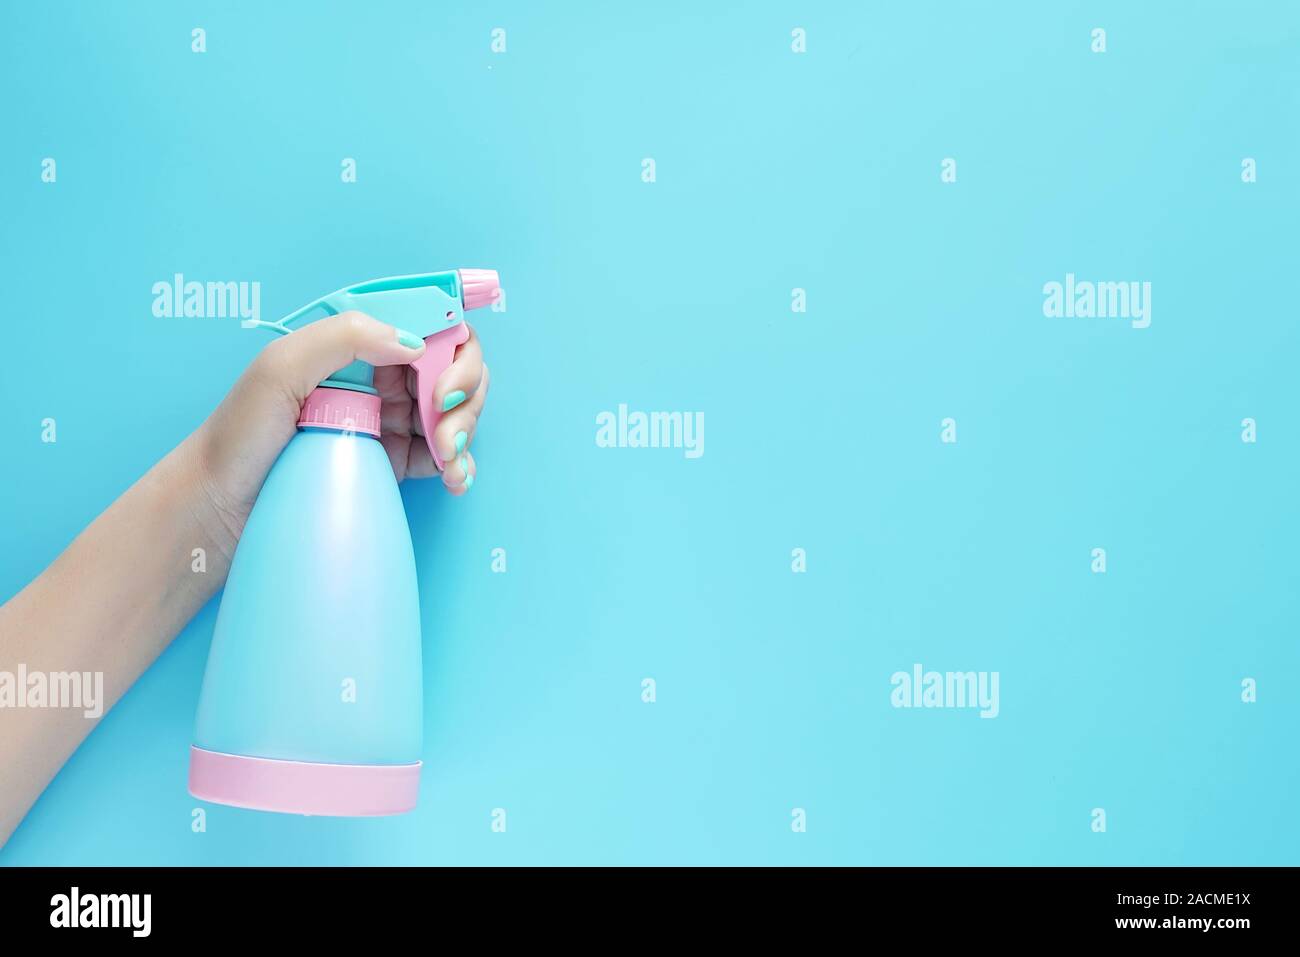 woman hand holding cleaning spray blue plastic bottle detergent isolated on blue background with copy space for text or logo Stock Photo